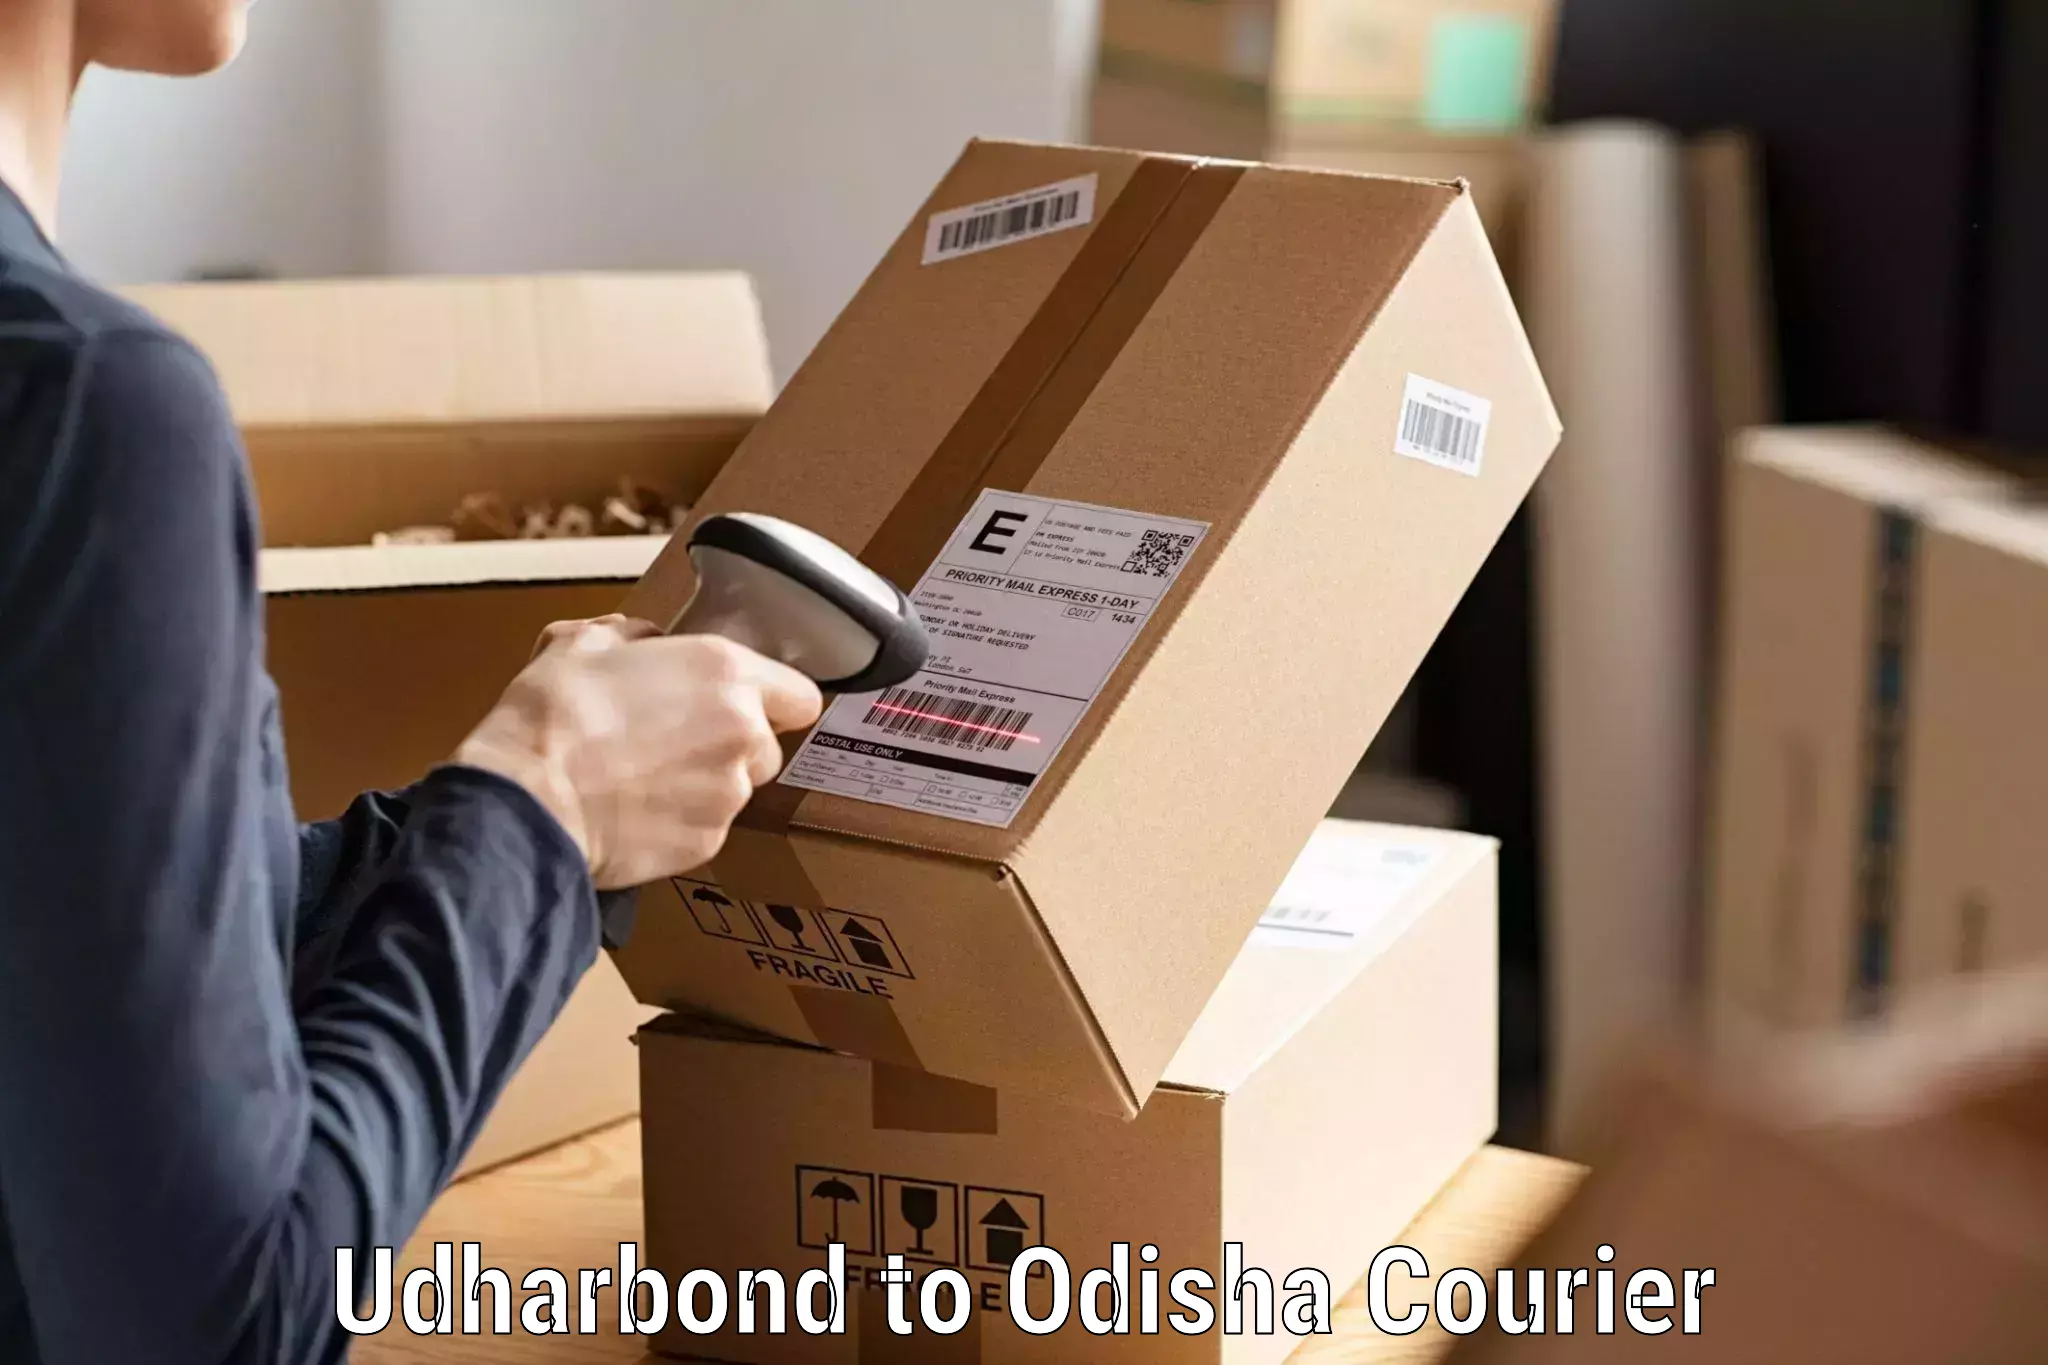 24/7 courier service in Udharbond to Birmaharajpur